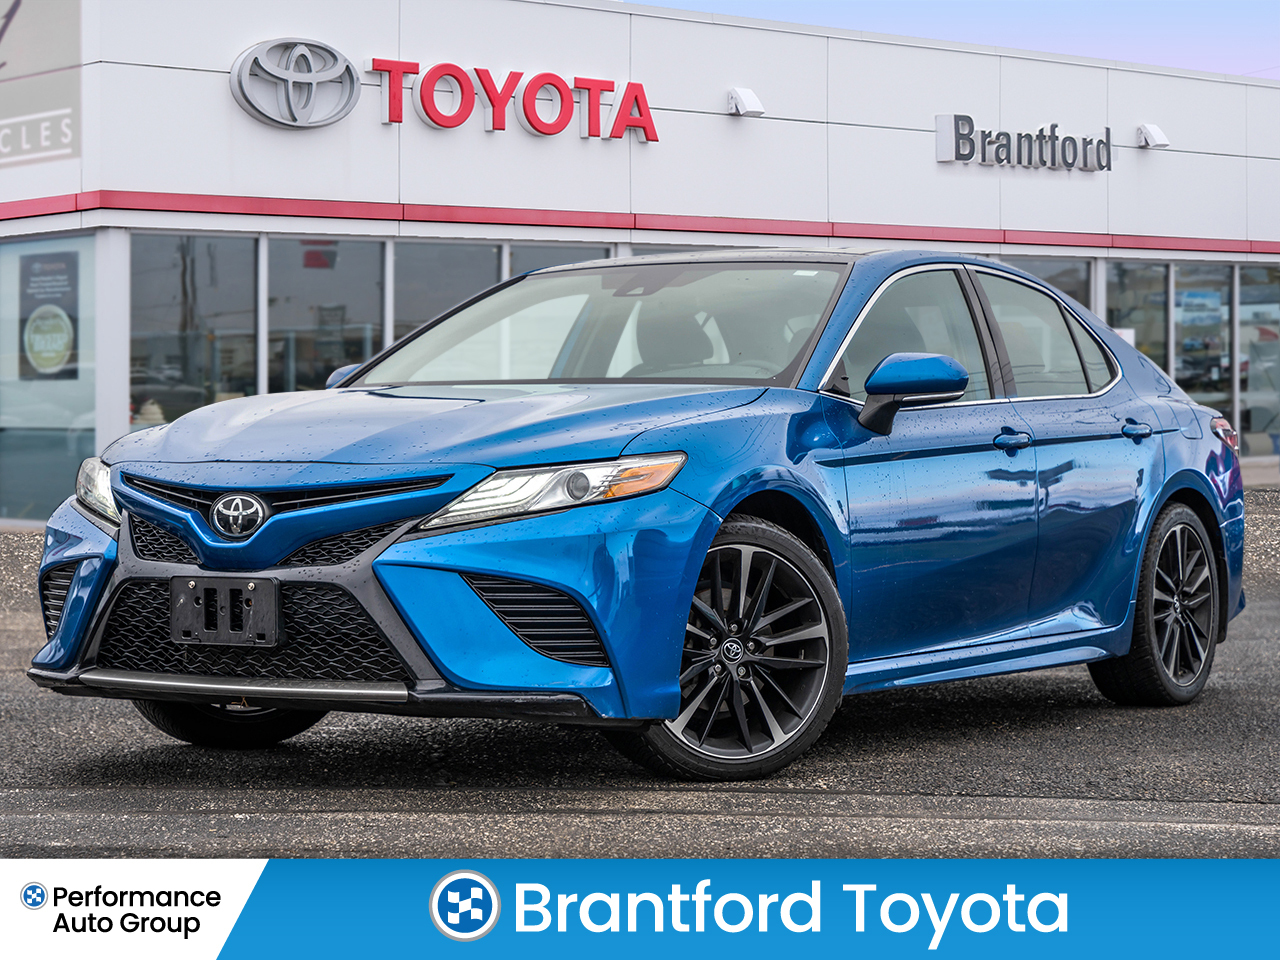 2019 Toyota Camry SOLD - PENDING DELIVERY